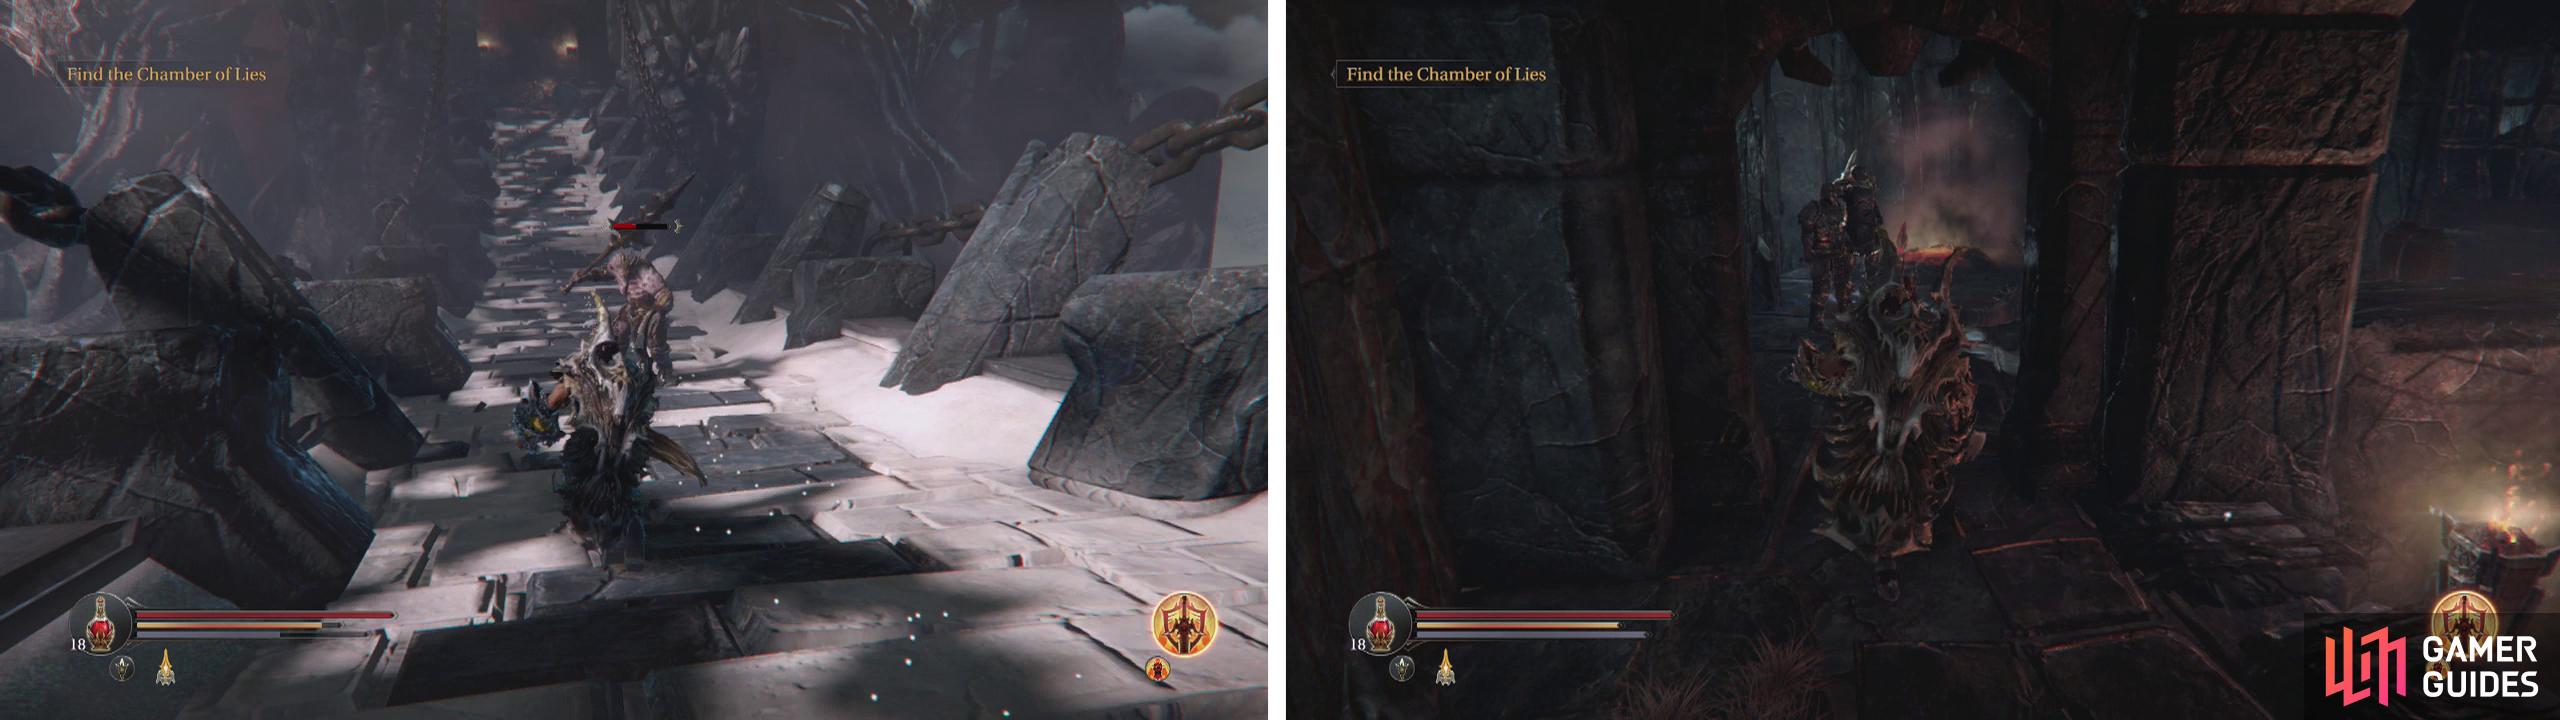 Defeat the Tyrant on the bridge (left) and then use the key he drops to open the gate in the Western Antechamber (right).